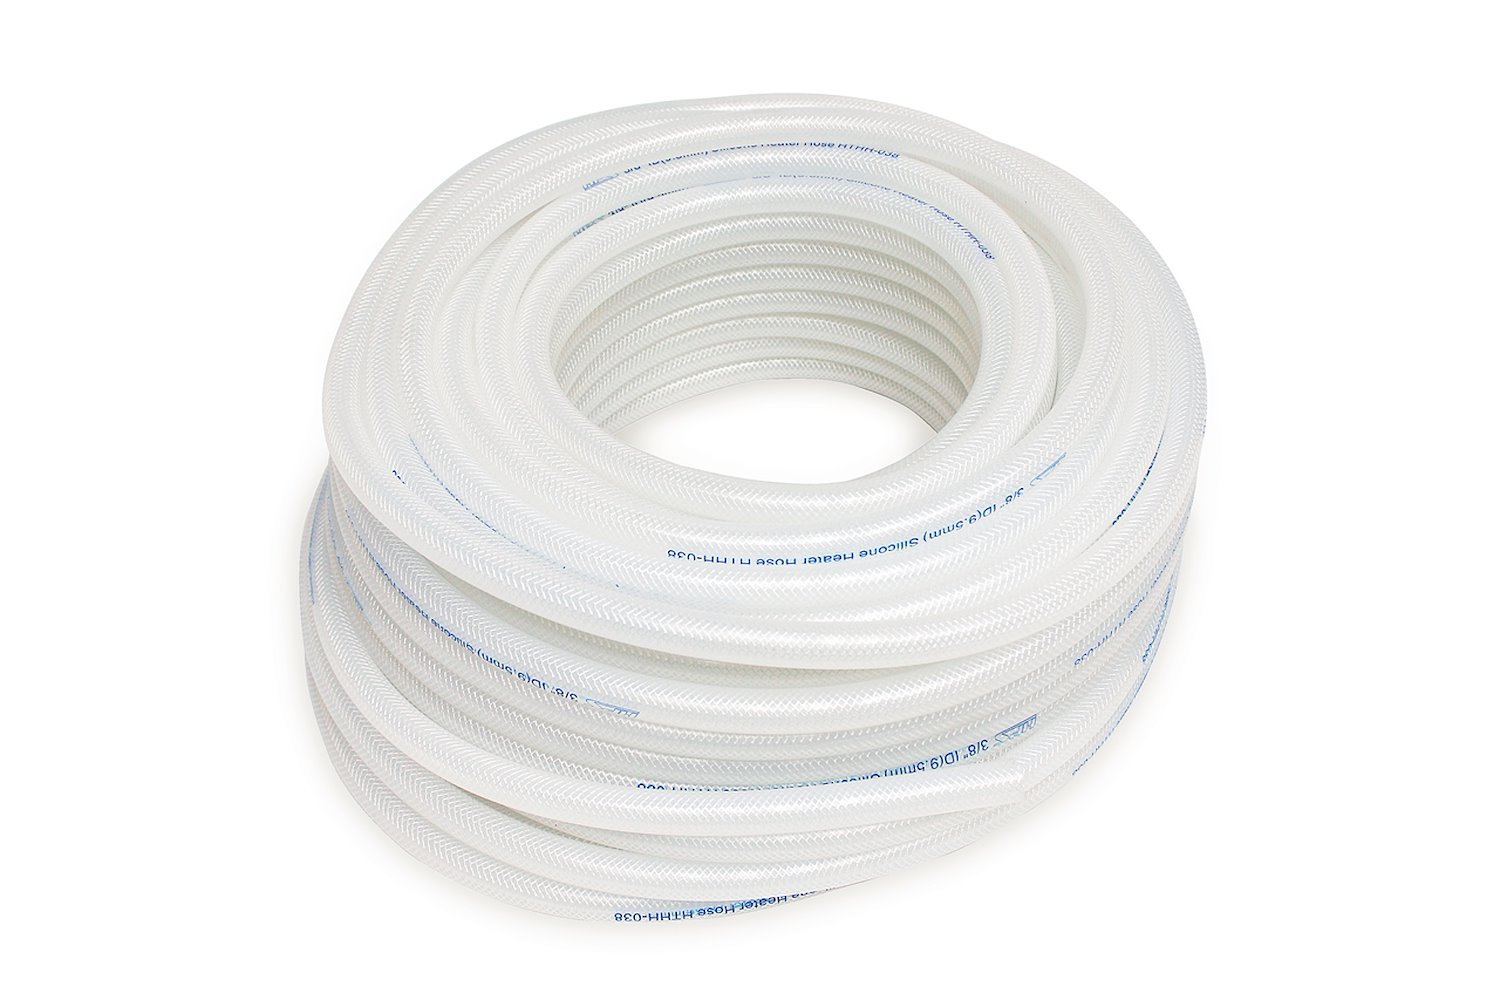 HTHH-013-CLEARx50 Silicone Heater Hose Tubing, High-Temp Reinforced, 1/8 in. ID, 50 ft. Roll, Clear